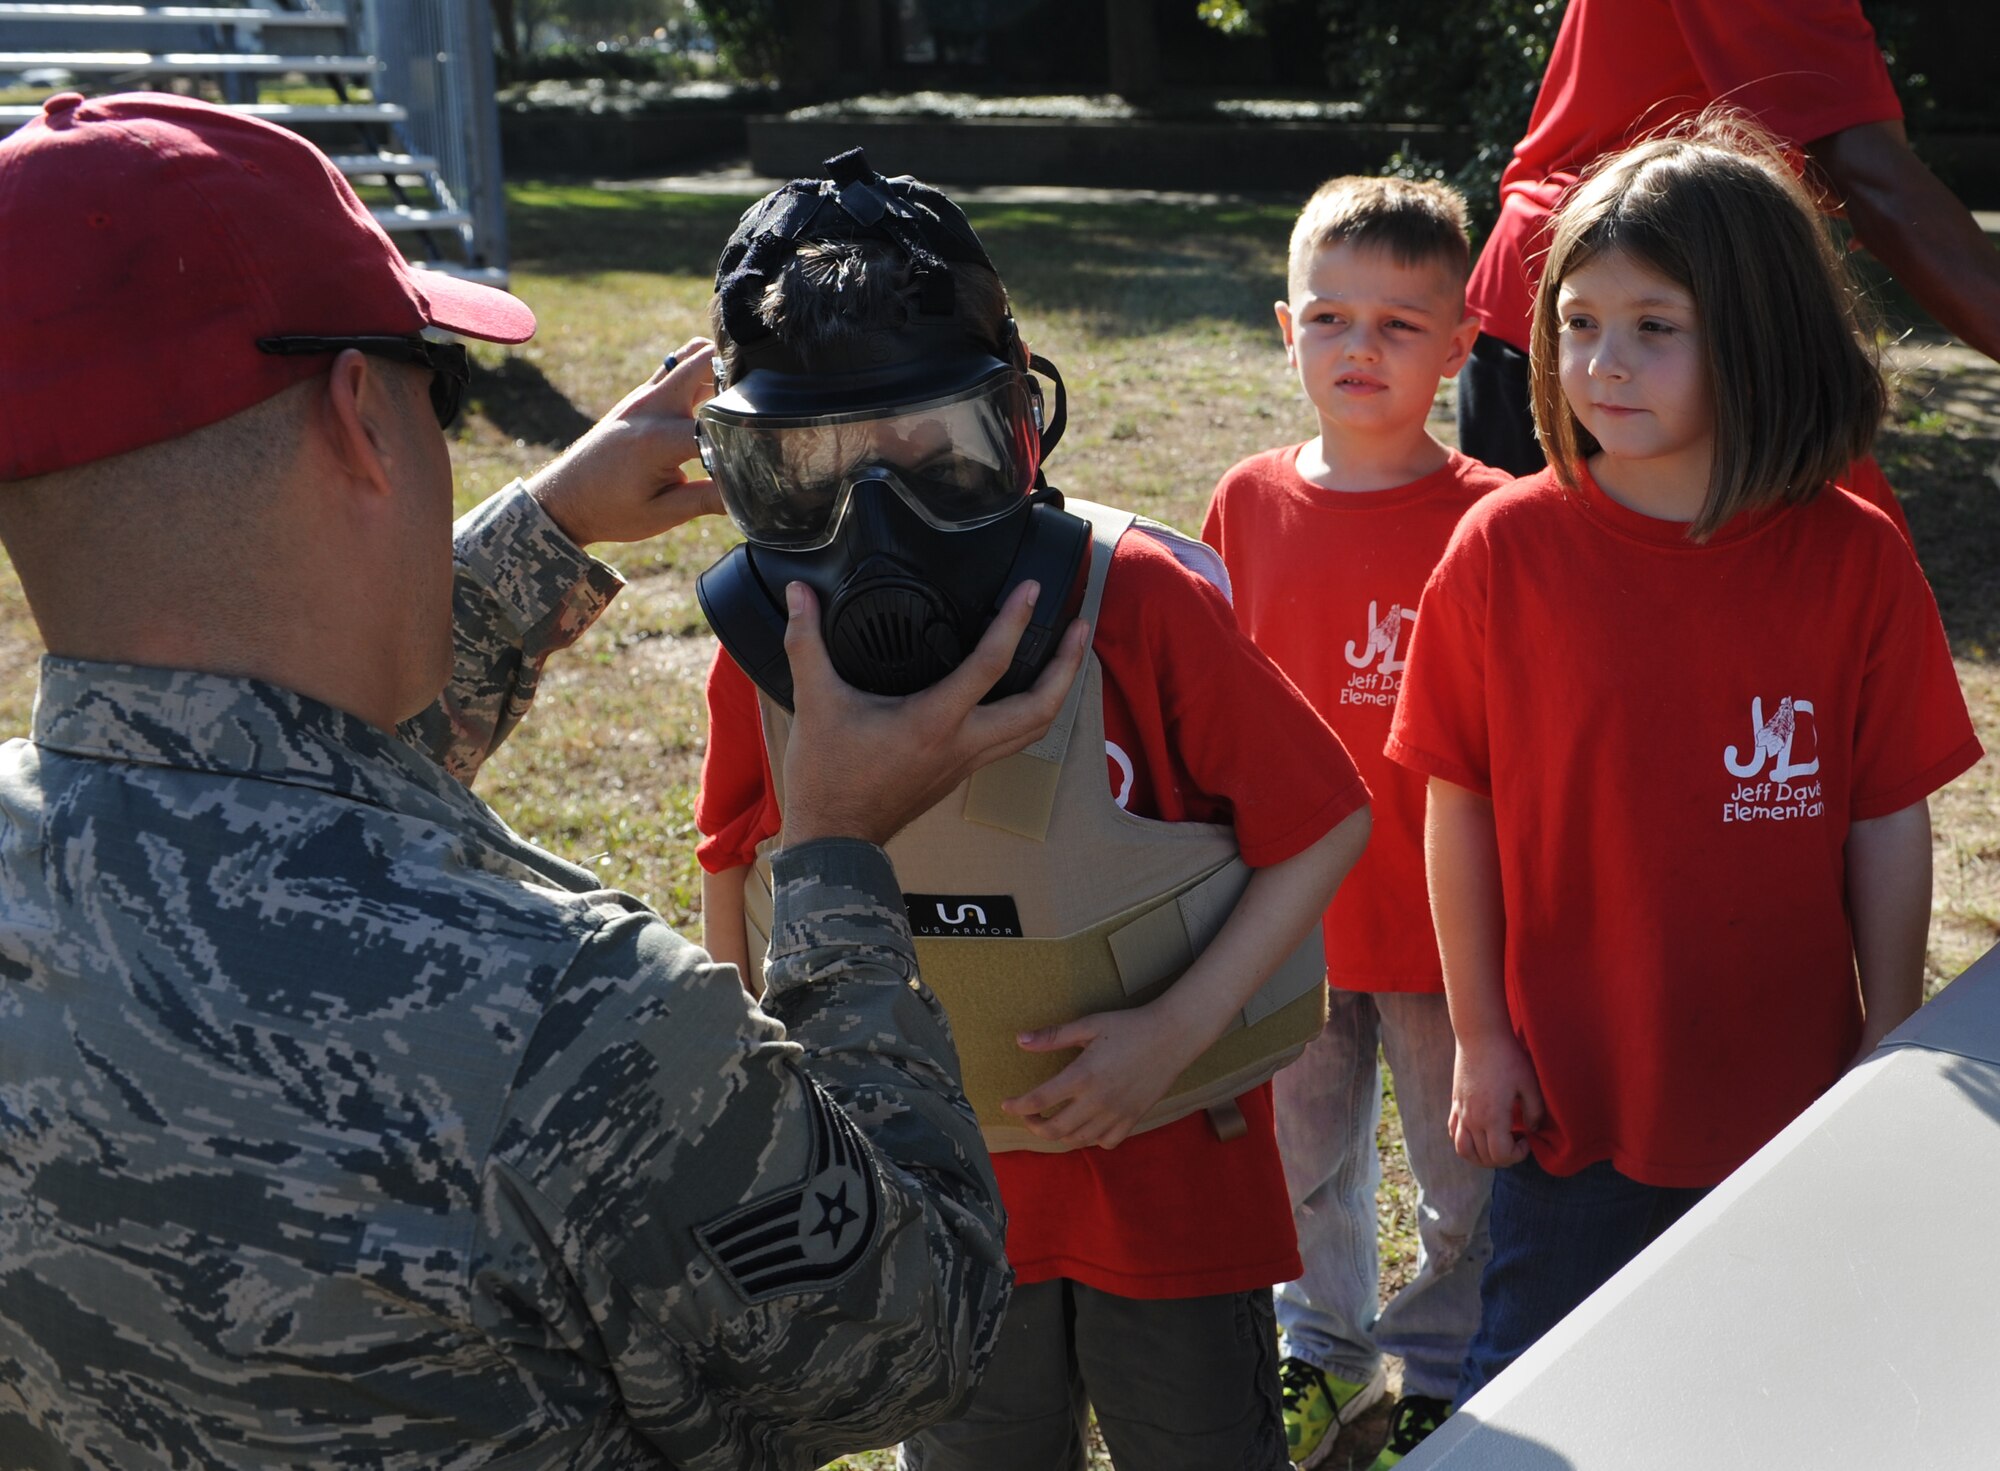 Staff Sgt. Matthew Keel, 81st Security Forces Squadron combat arms instructor, secures a gas mask on a Jeff Davis Elementary School first grader during a field trip to the 81st SFS Oct. 28, 2016, on Keesler Air Force Base, Miss. The children also toured the Keesler Fire Department where they received a demonstration on the proper wear of firefighter bunker gear and fire prevention safety information. (U.S. Air Force photo by Kemberly Groue/Released) 